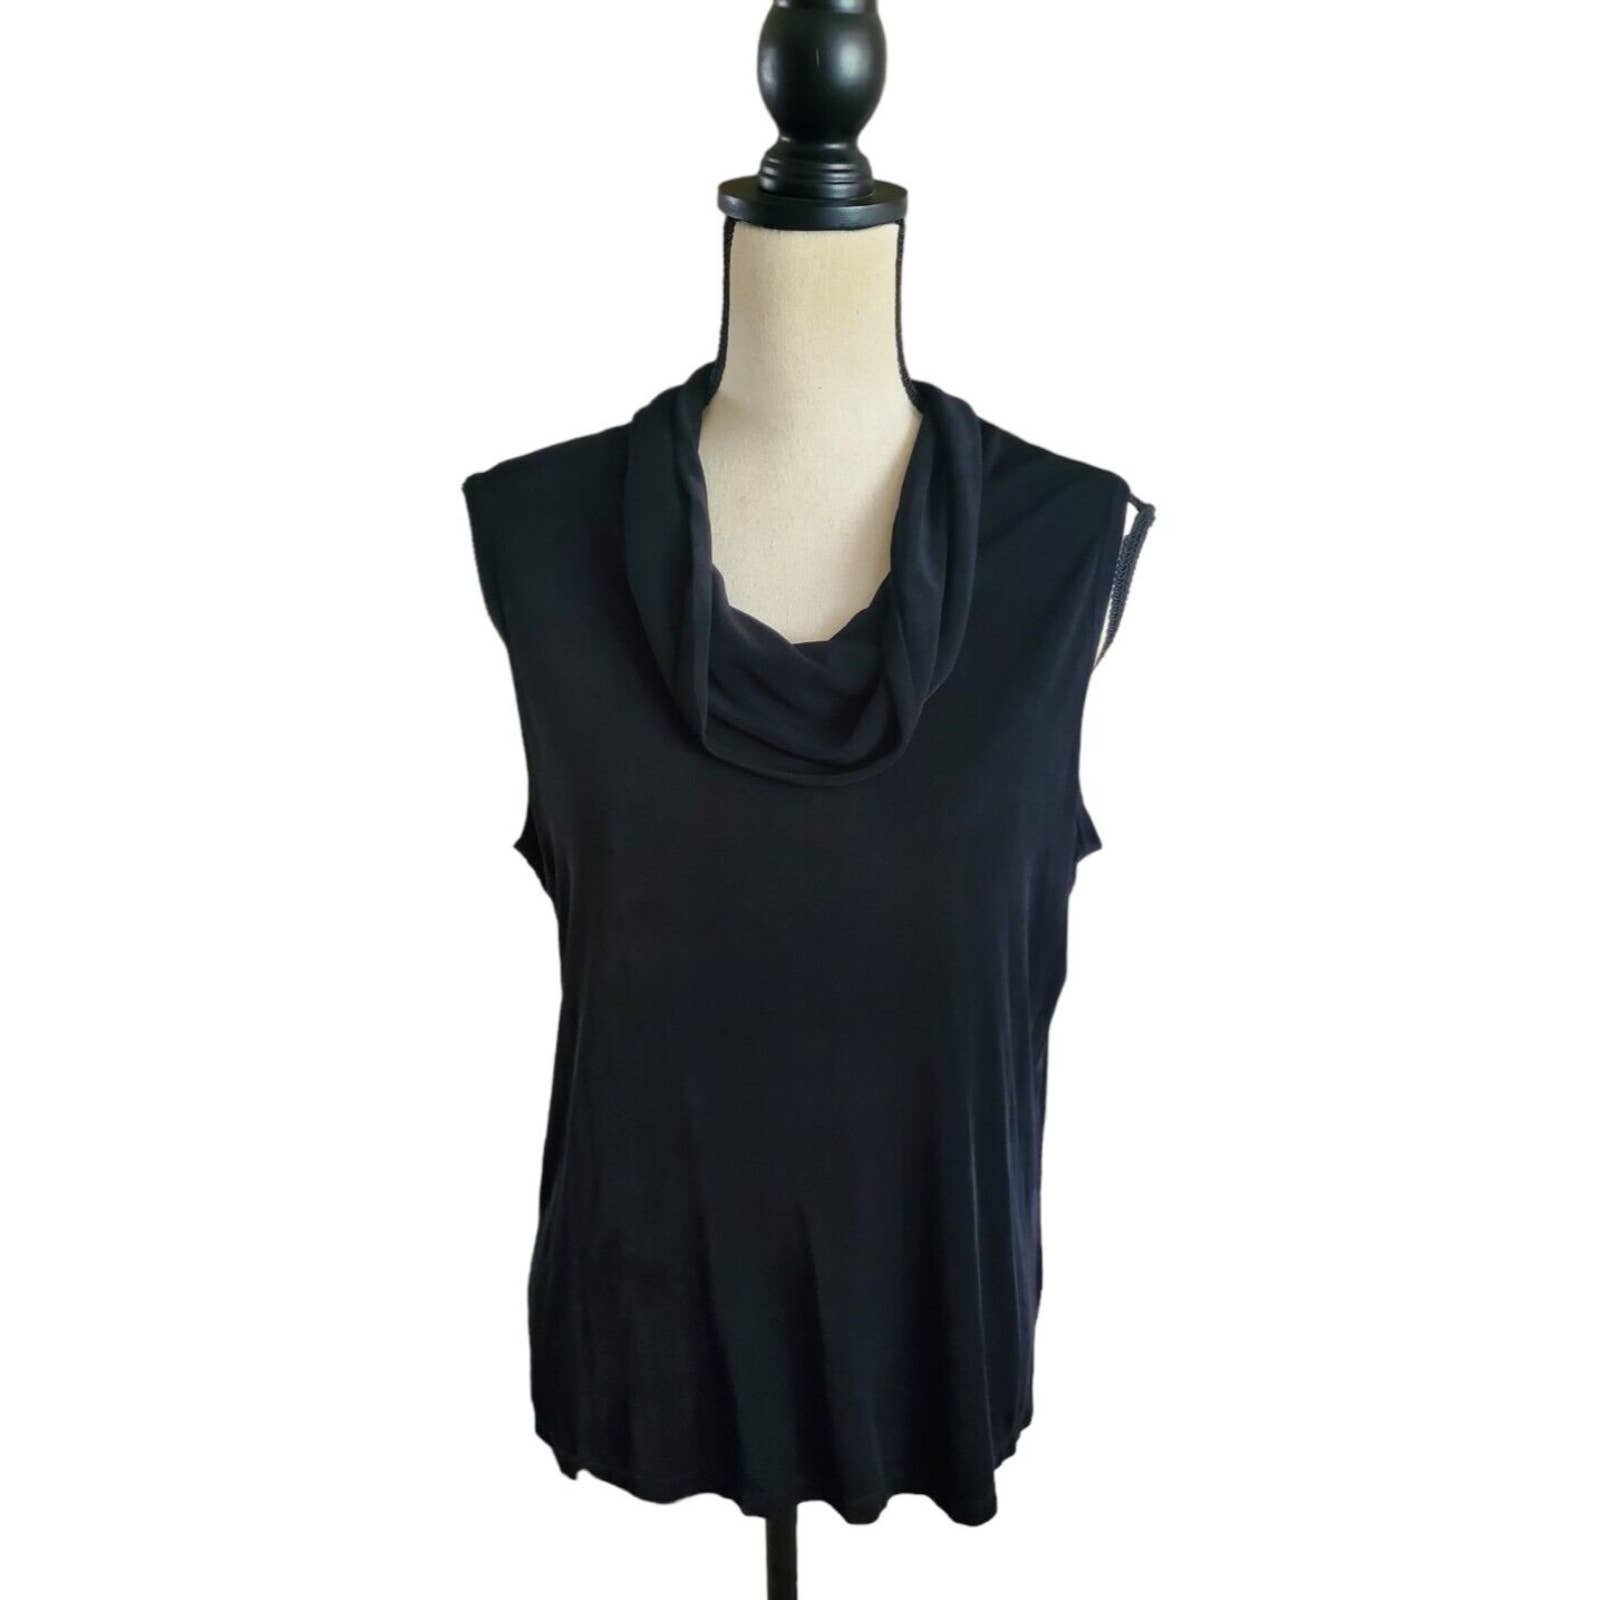 save up to 70% Mirasol Black Acetate Slinky Travelers Cowl Neck Sleeveless Top L pDT1K0cEq Discount